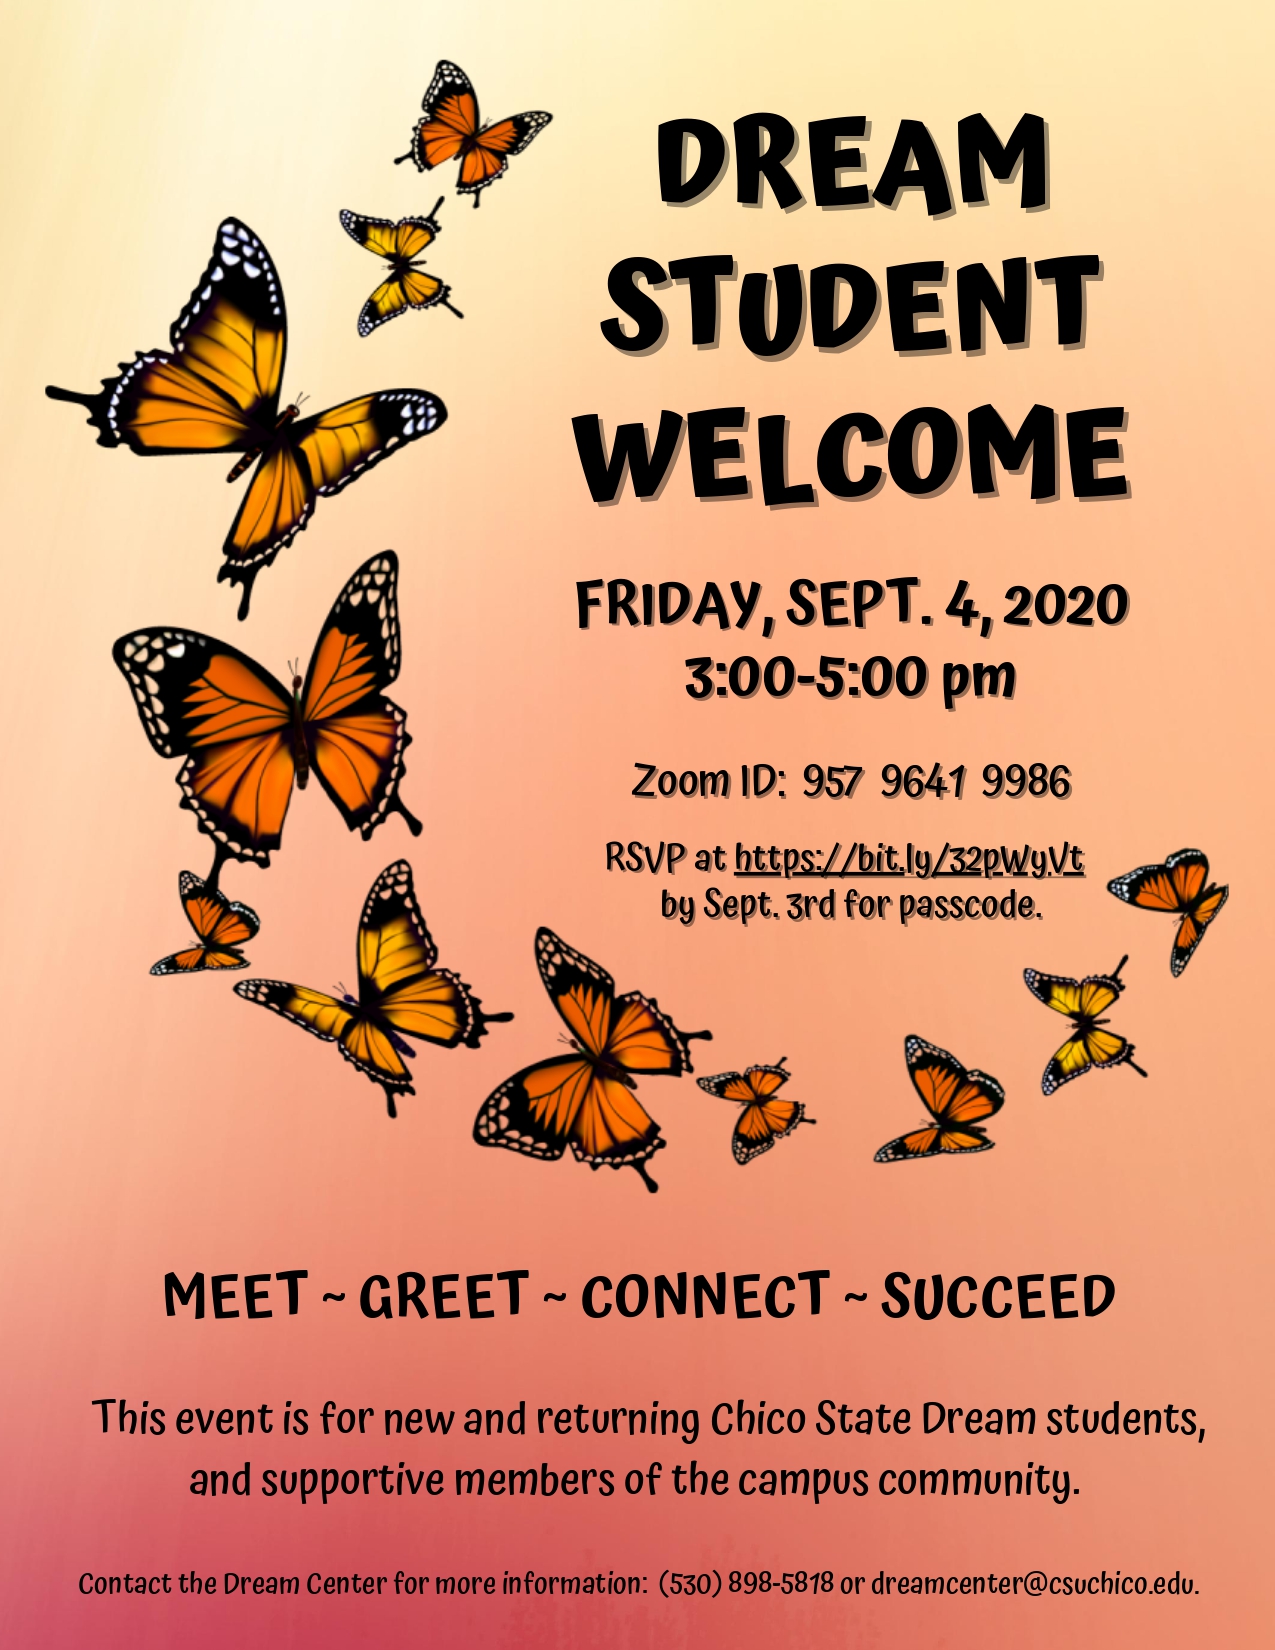 dream student welcome friday sept 4 2020 3 – 5 p.m. Zoom ID: 95796419986